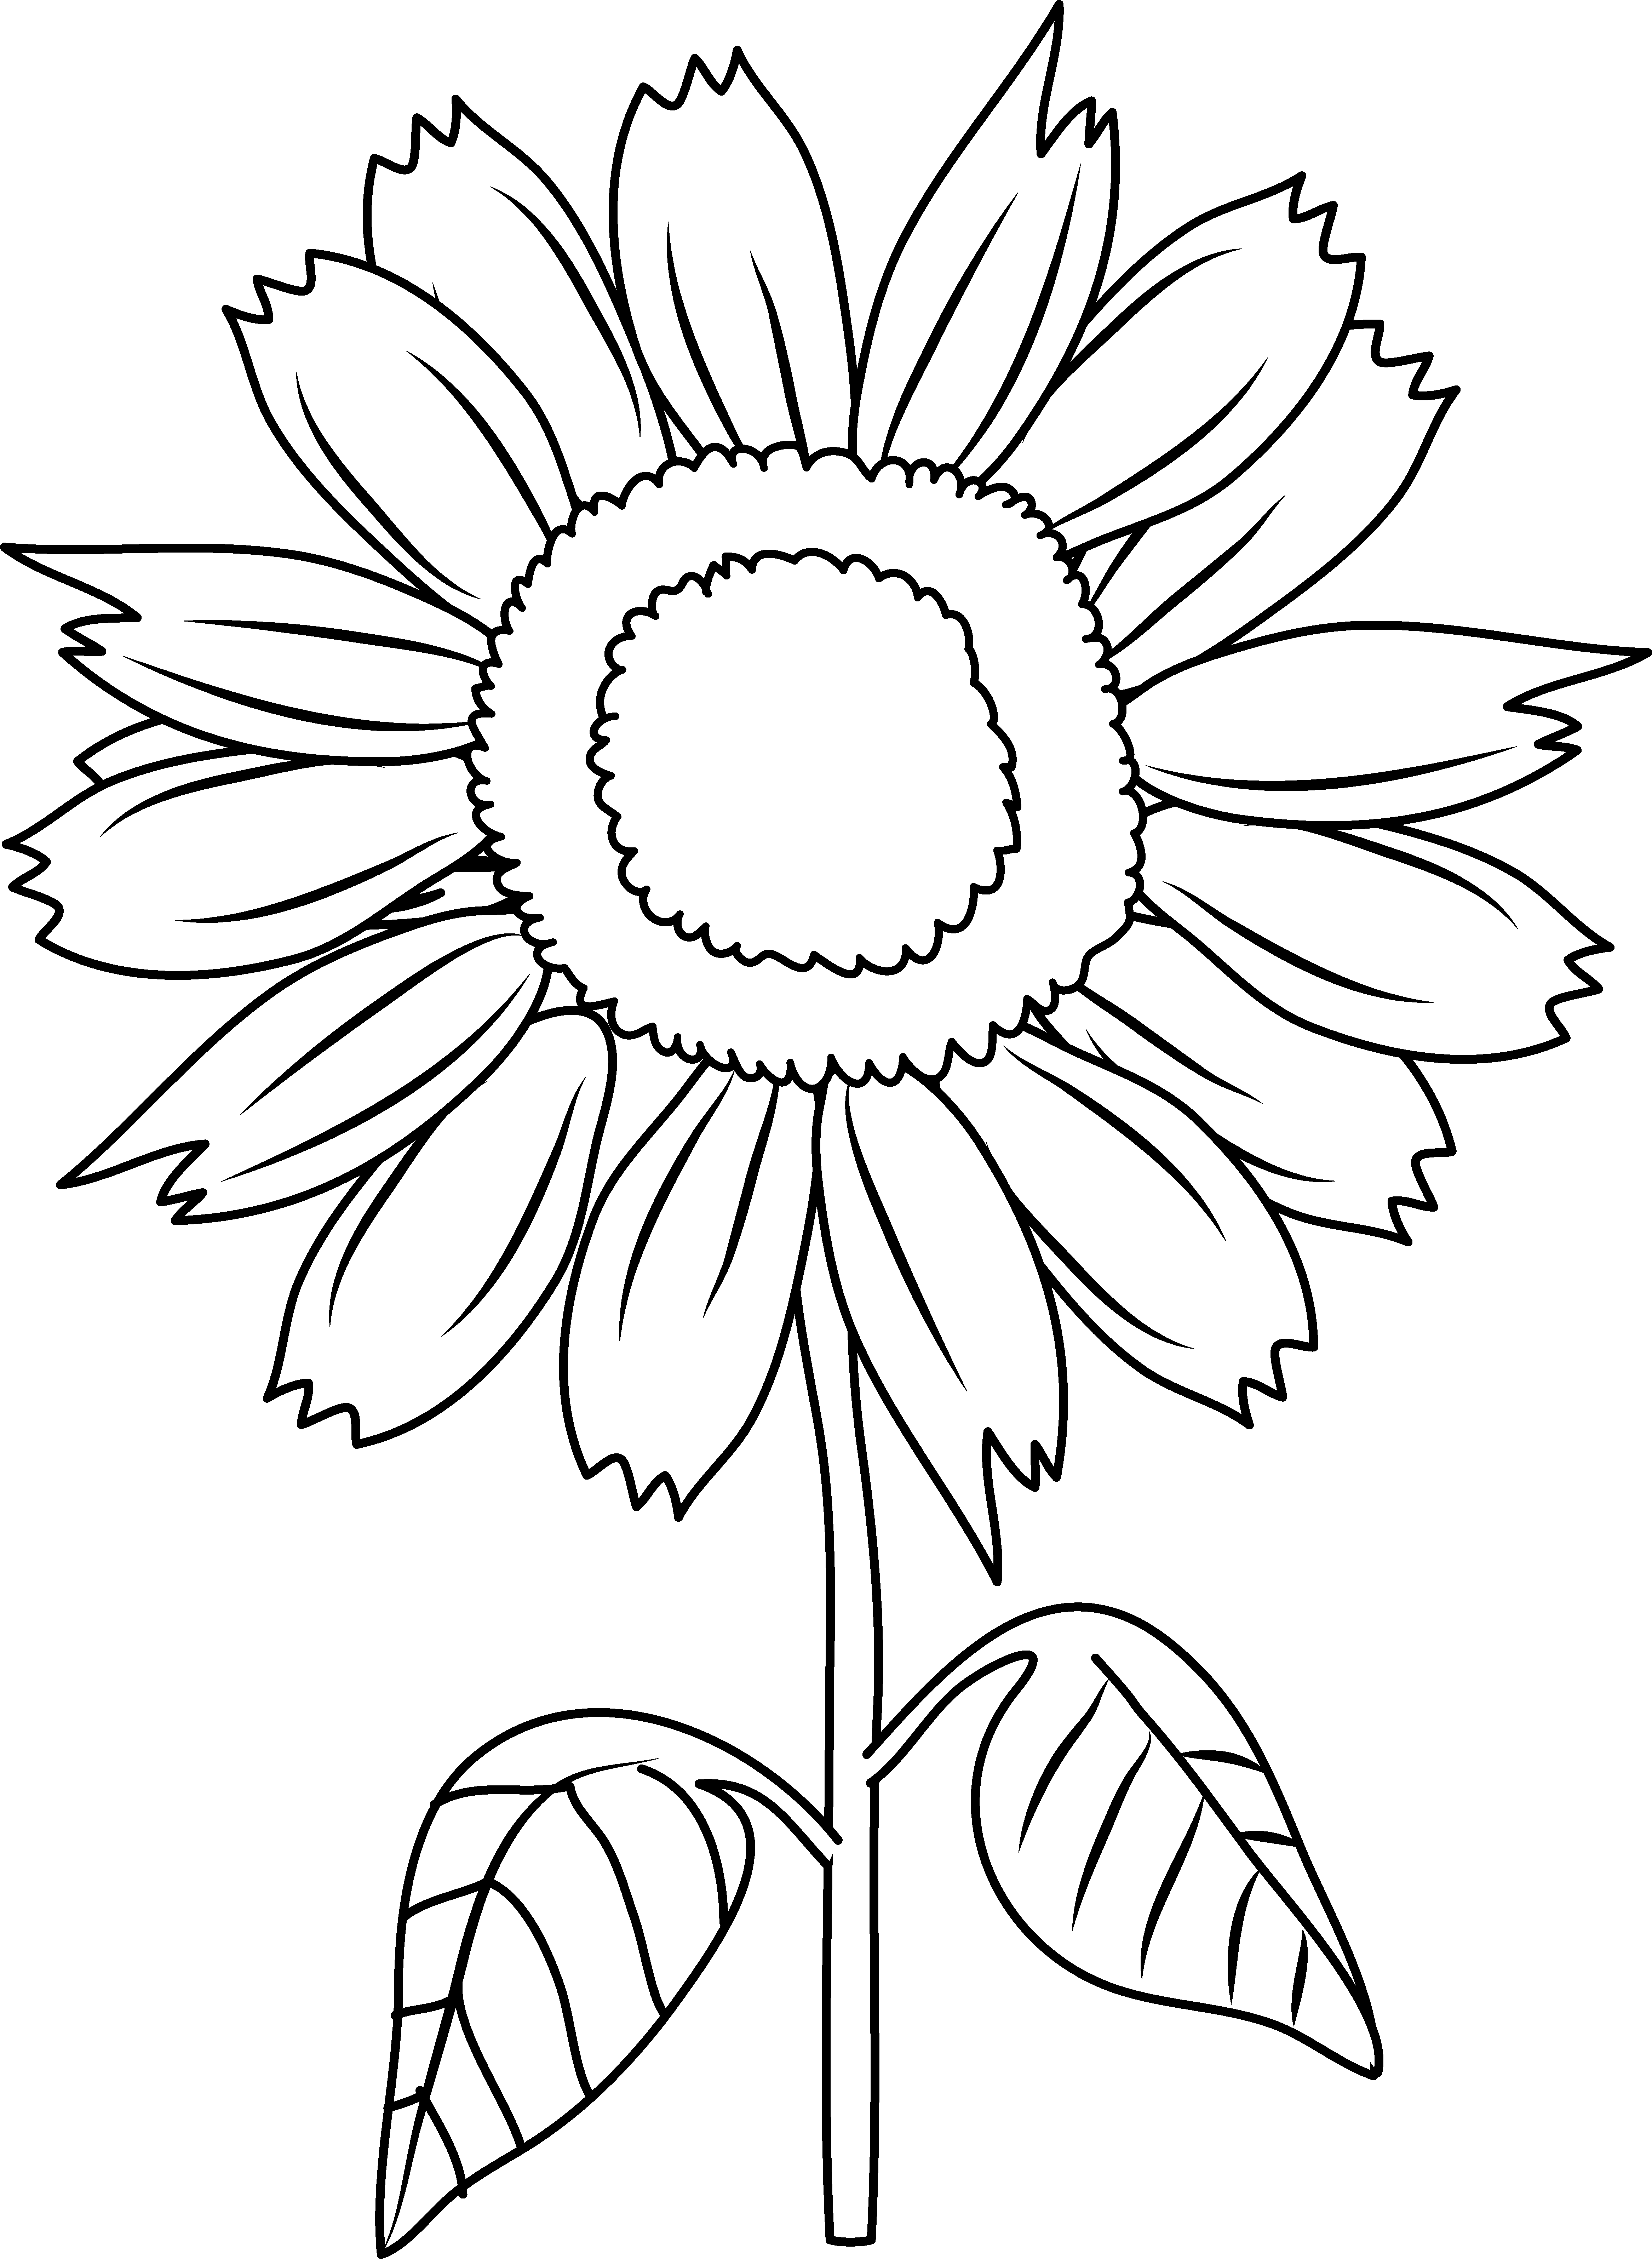 Sunflower Clipart Black And Sunflowers White. Snowjet.co 